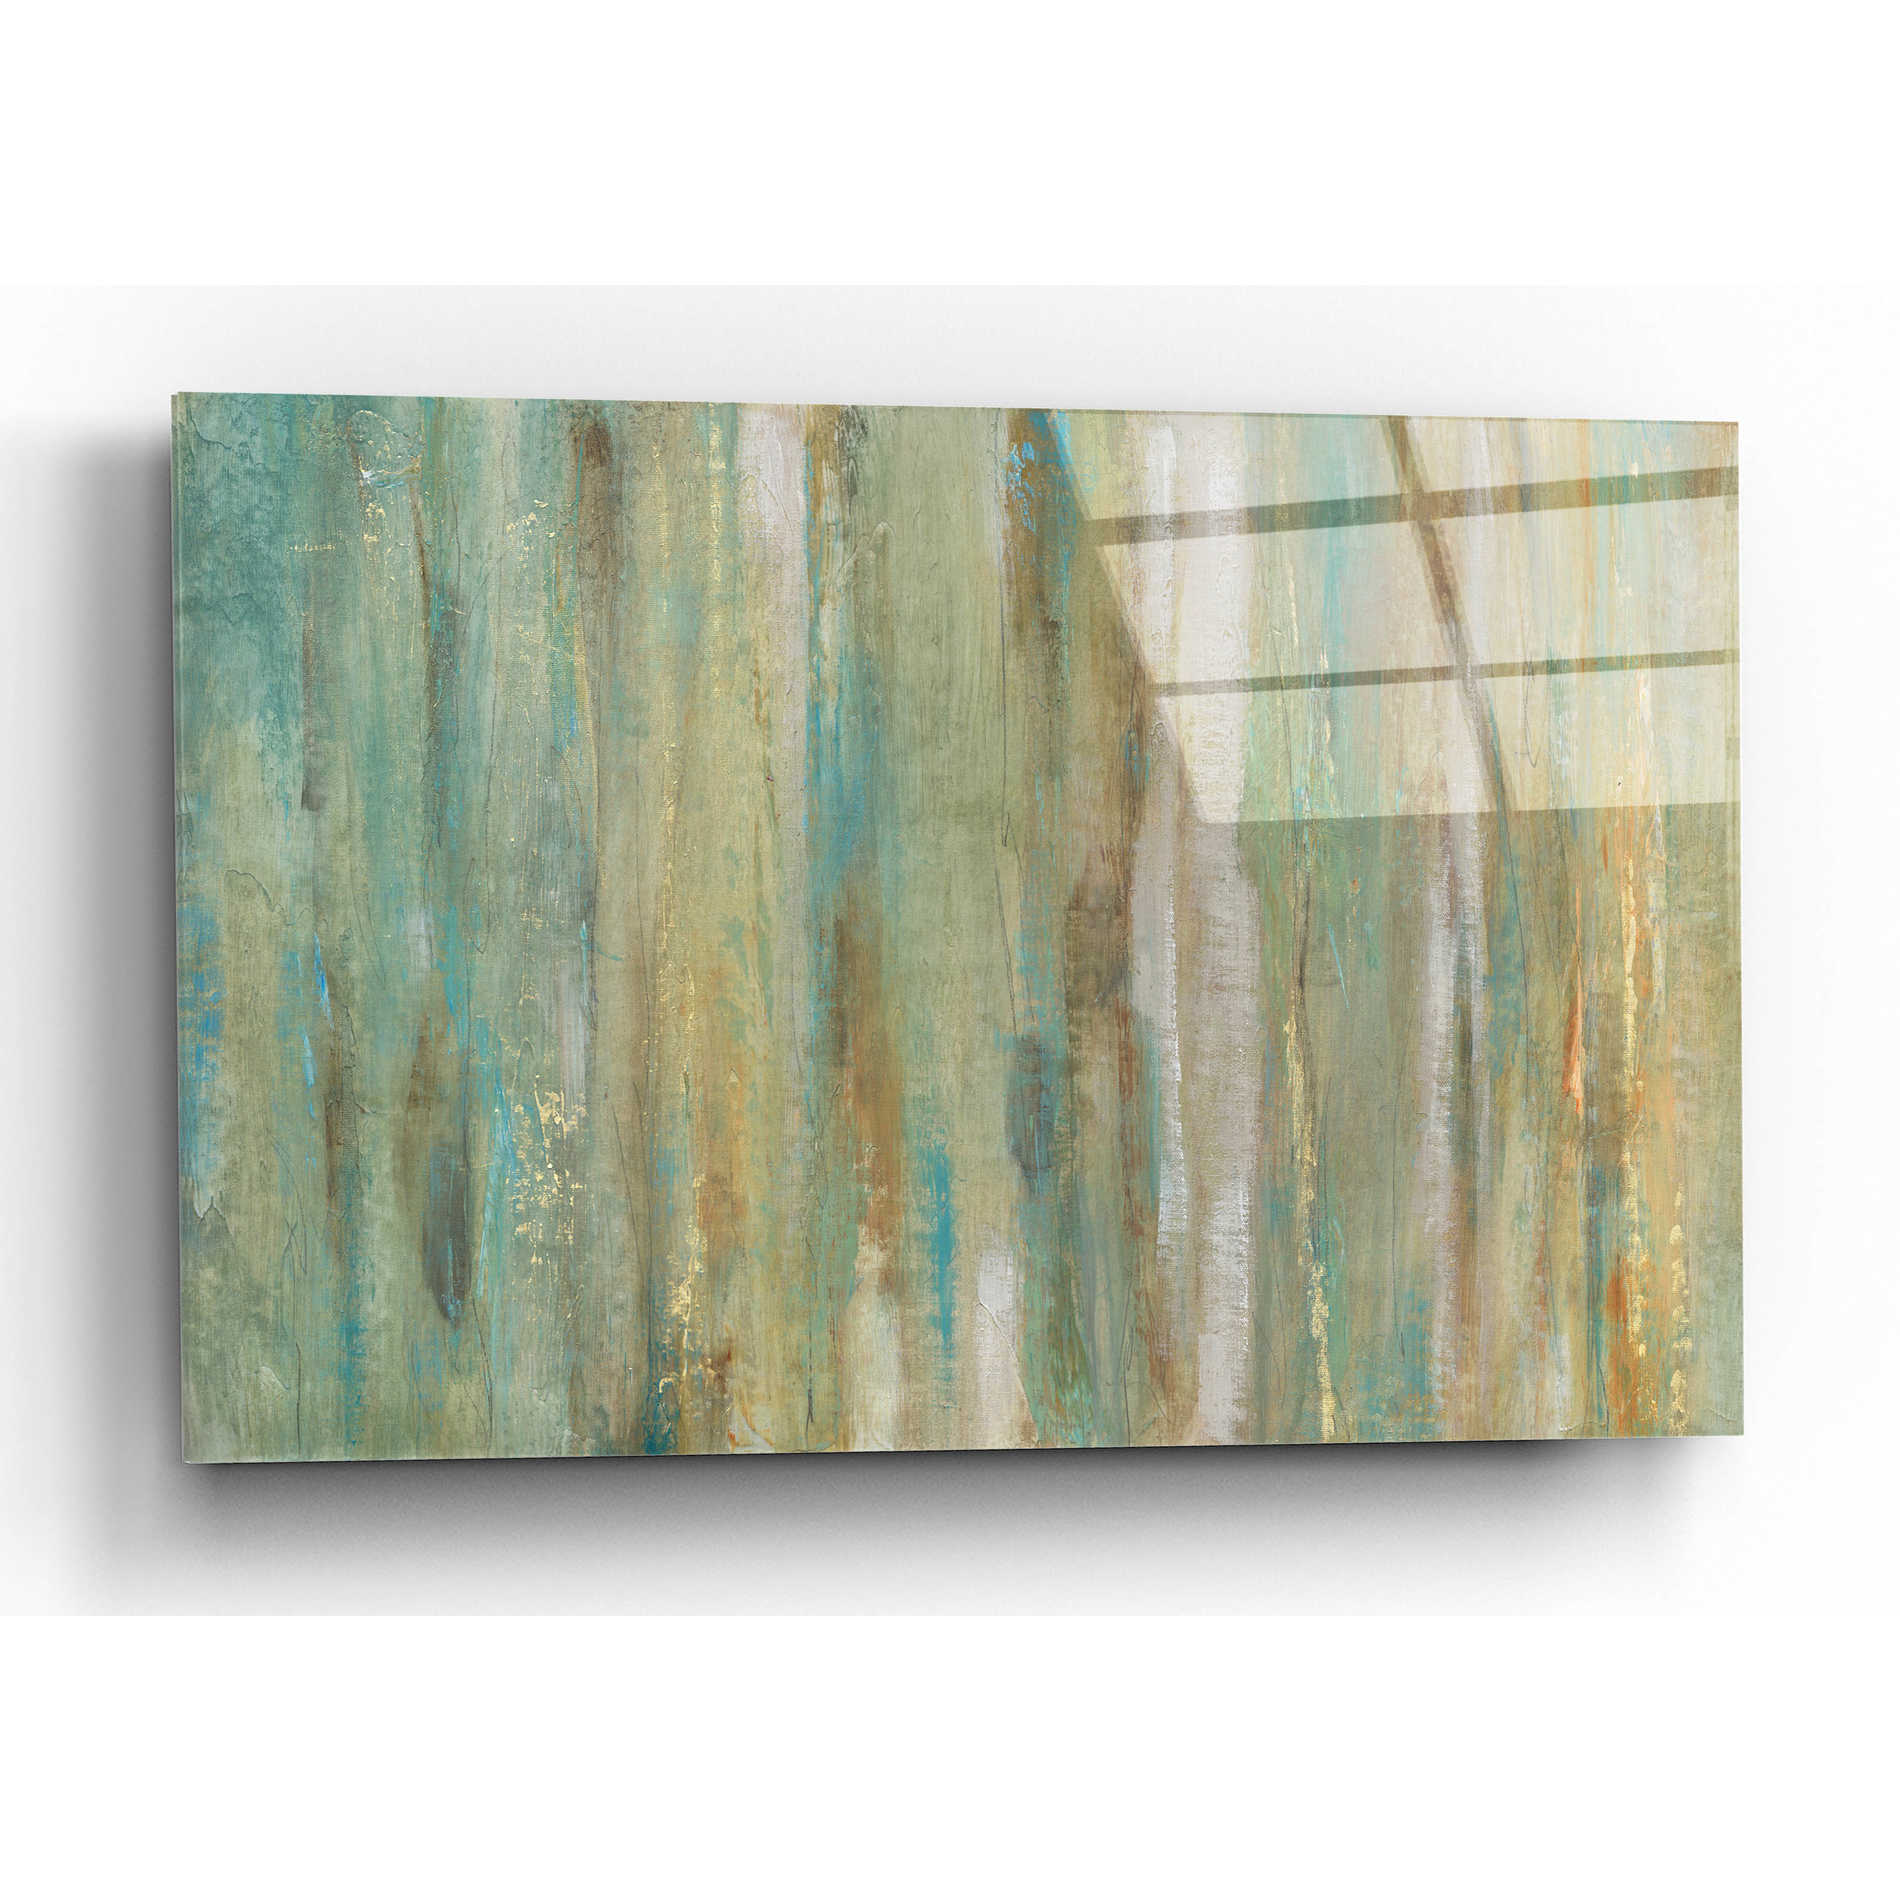 Epic Art 'Vertical Flow I' by Tim O'Toole, Acrylic Glass Wall Art,24x16